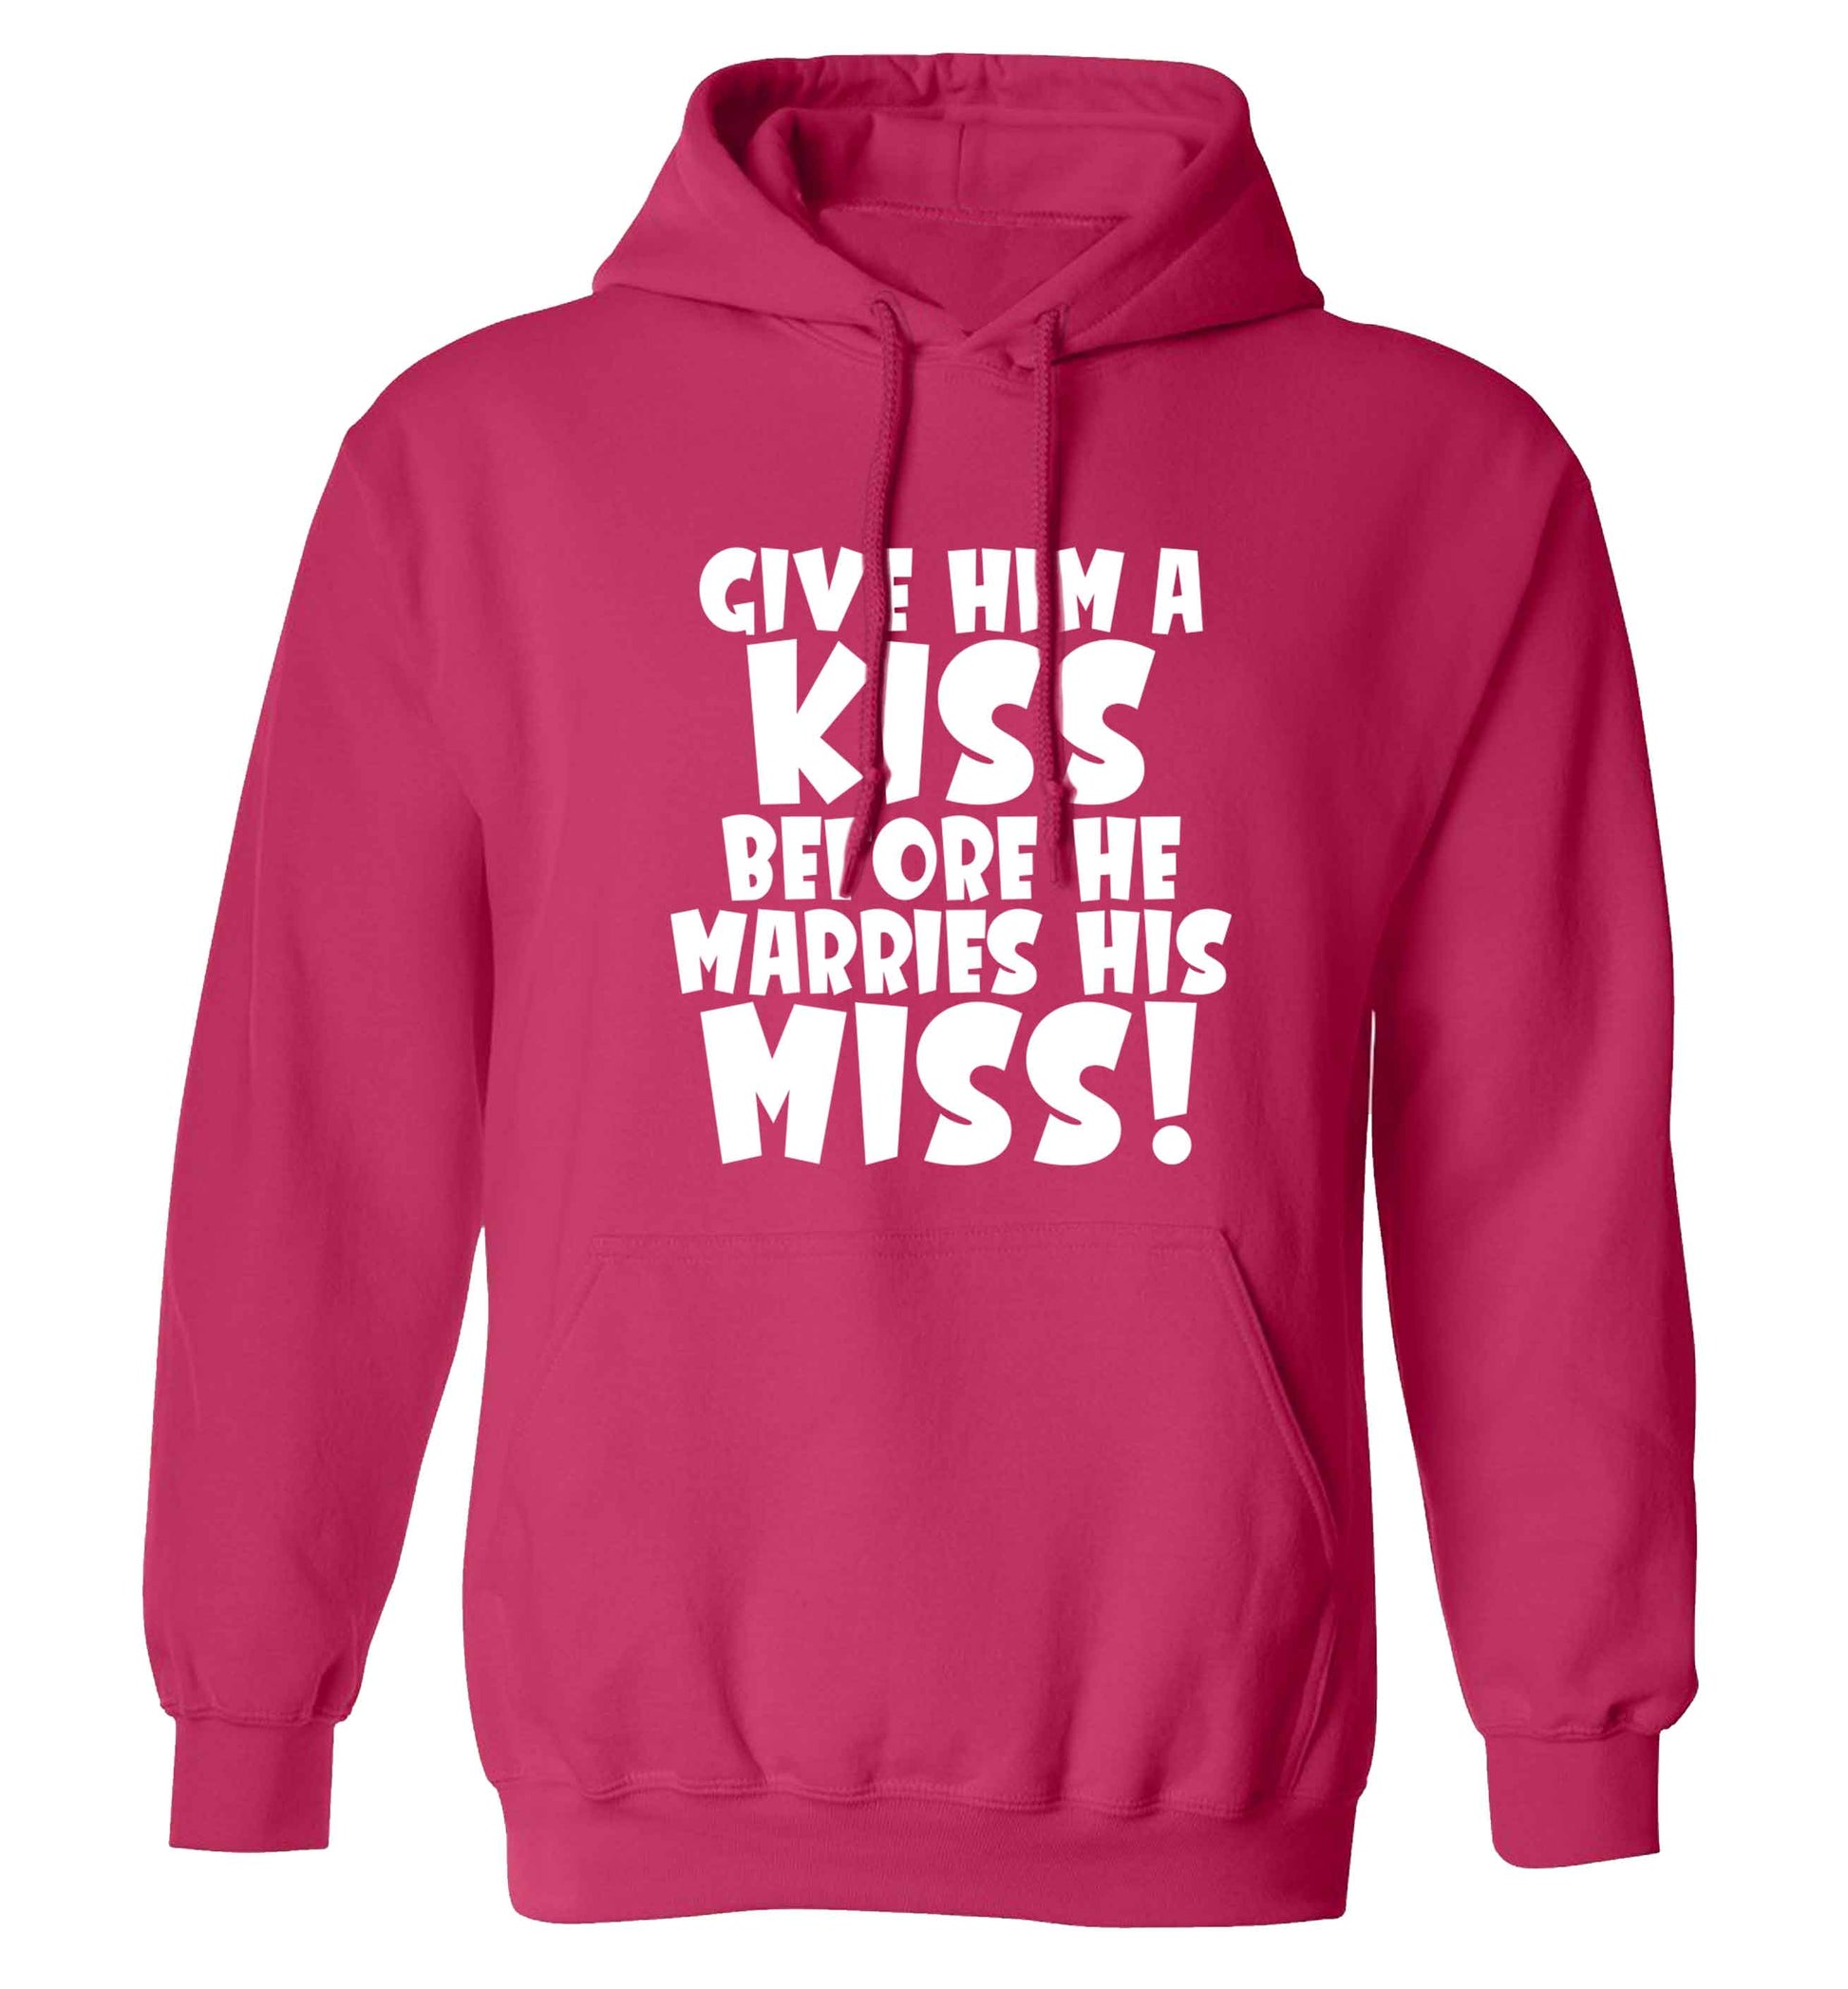 Give him a kiss before he marries his miss adults unisex pink hoodie 2XL